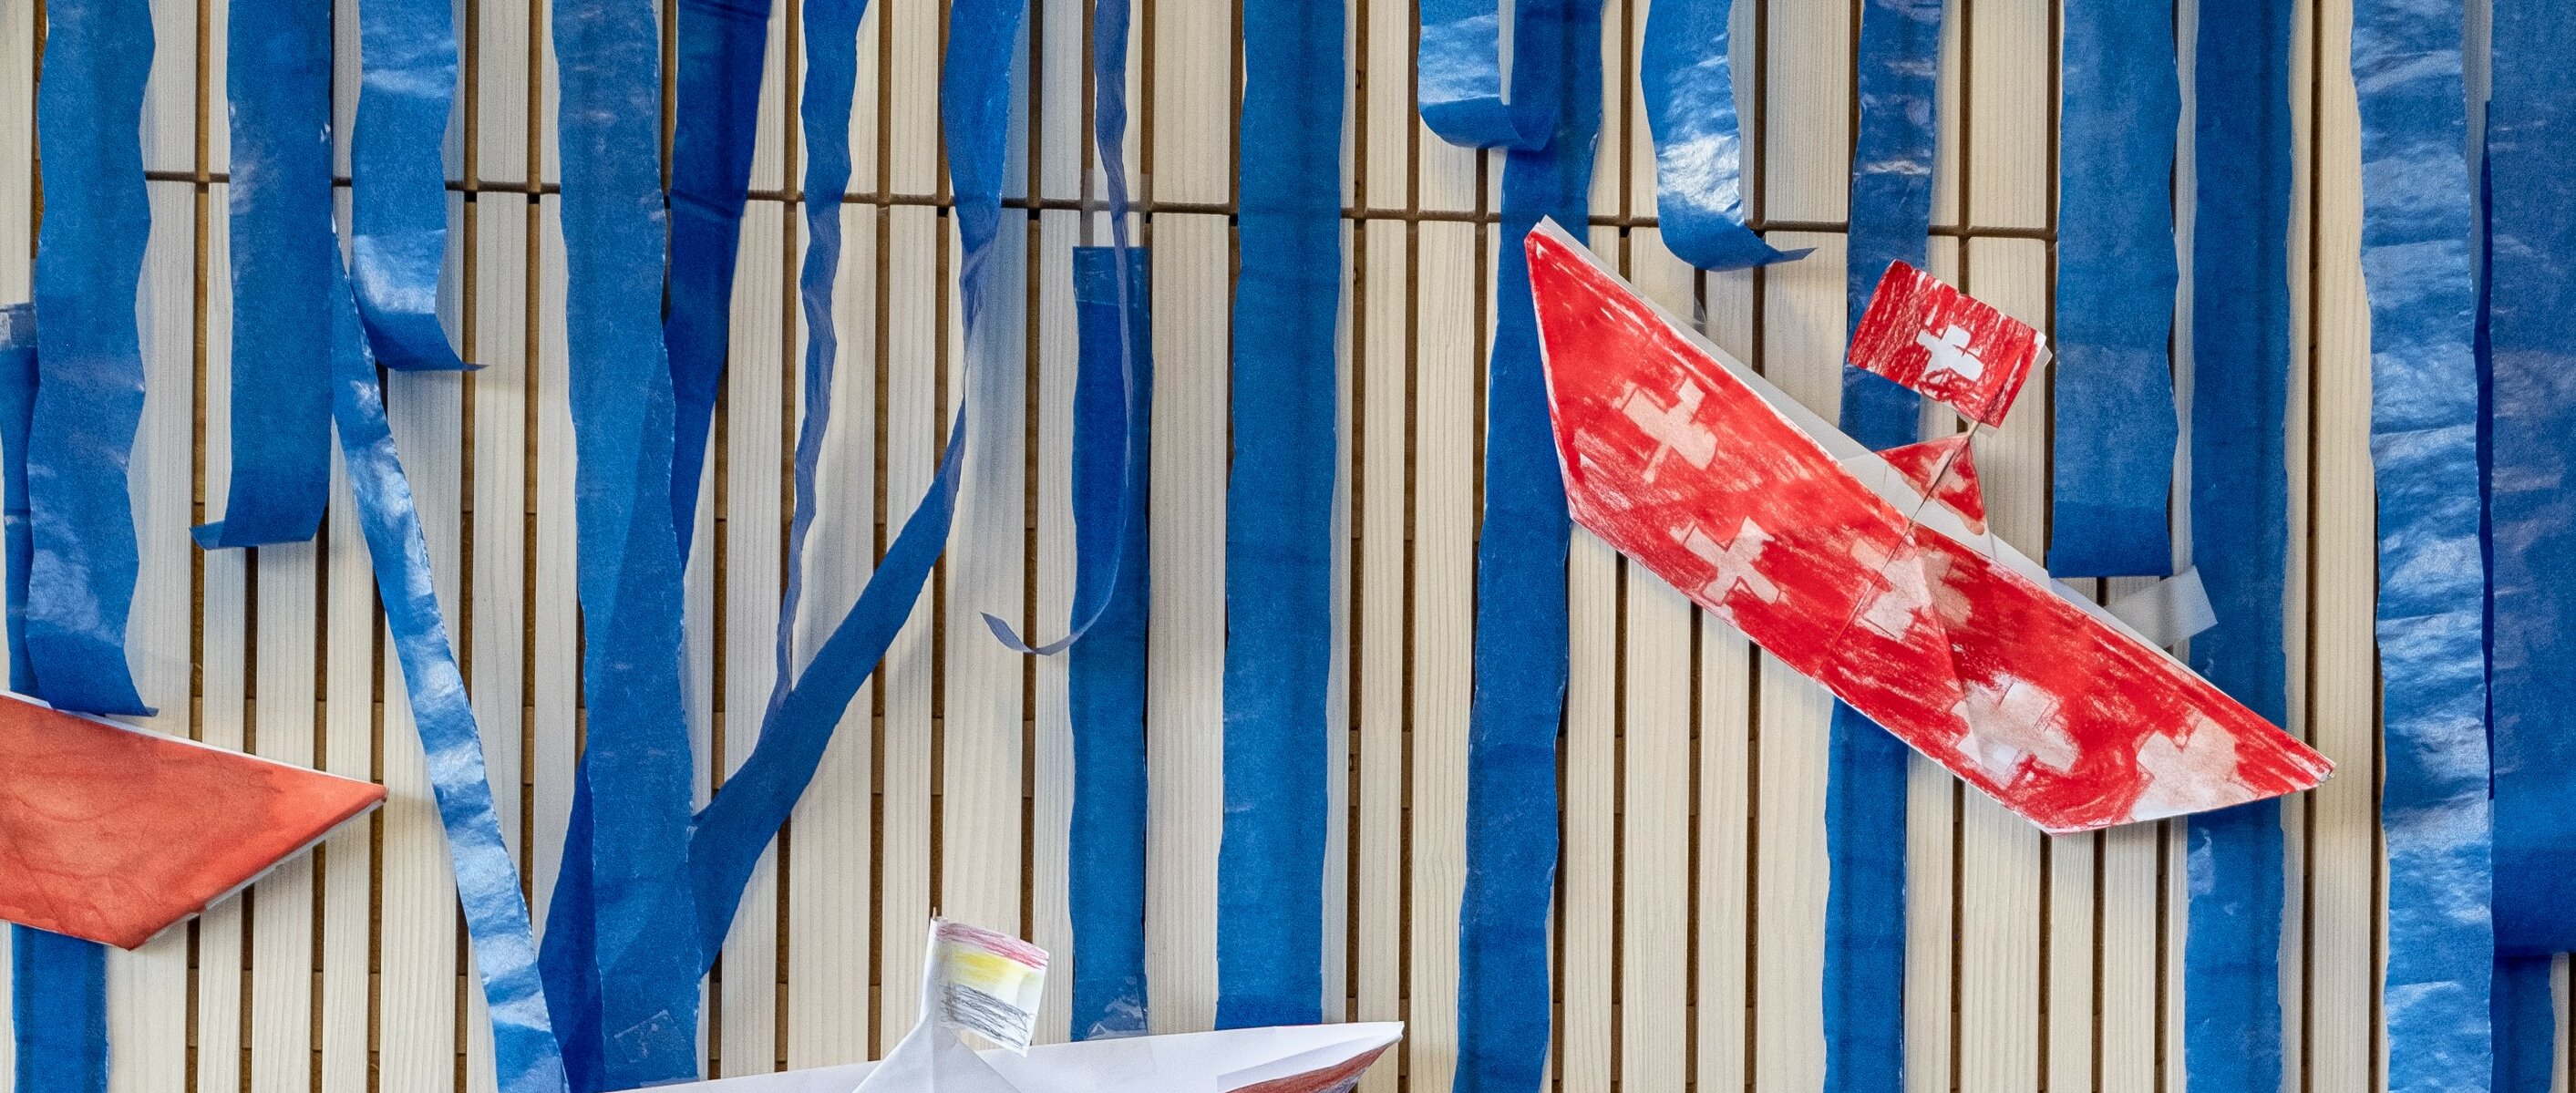 Self-made, painted paper boats hang on the wall as decoration. One of the boats is painted with the Swiss flag.